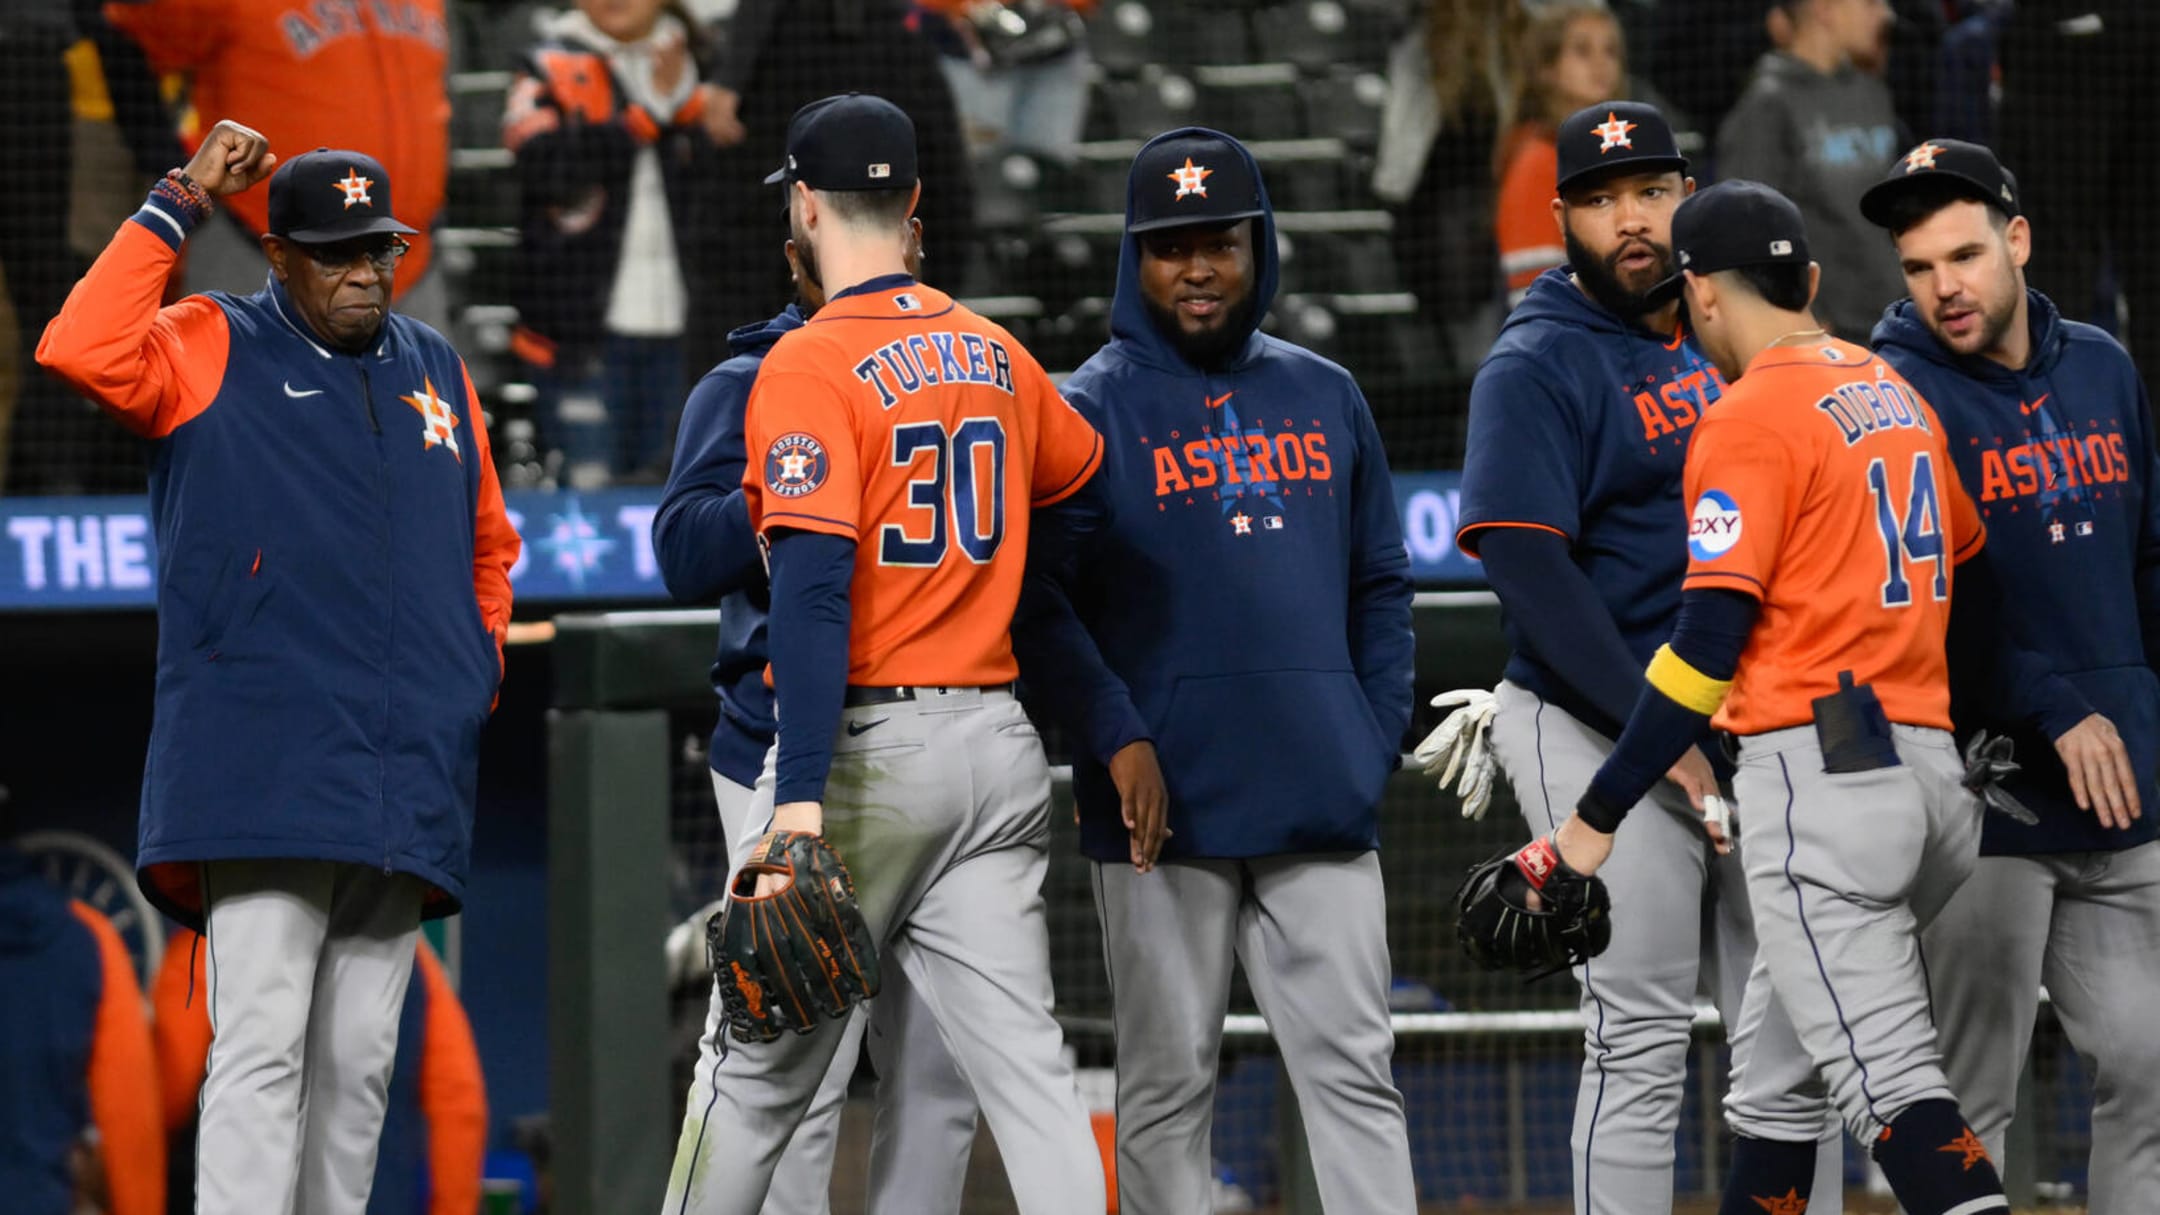 Astros-Mariners finale takes an ugly turn